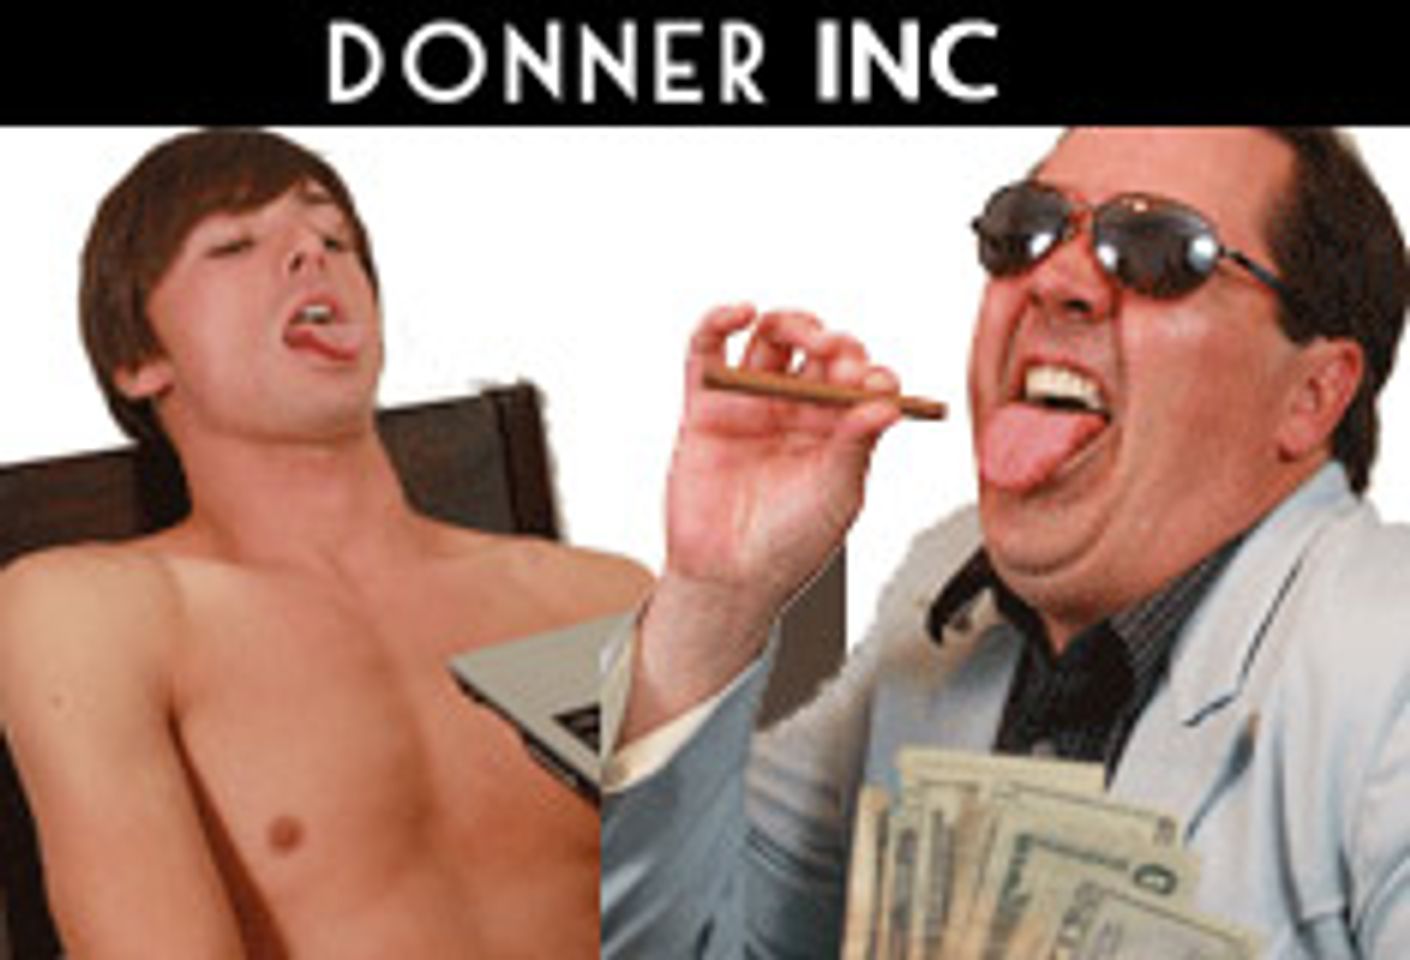 Mike Donner Announces 'How to Be A Gay Porn Star' Book Tour